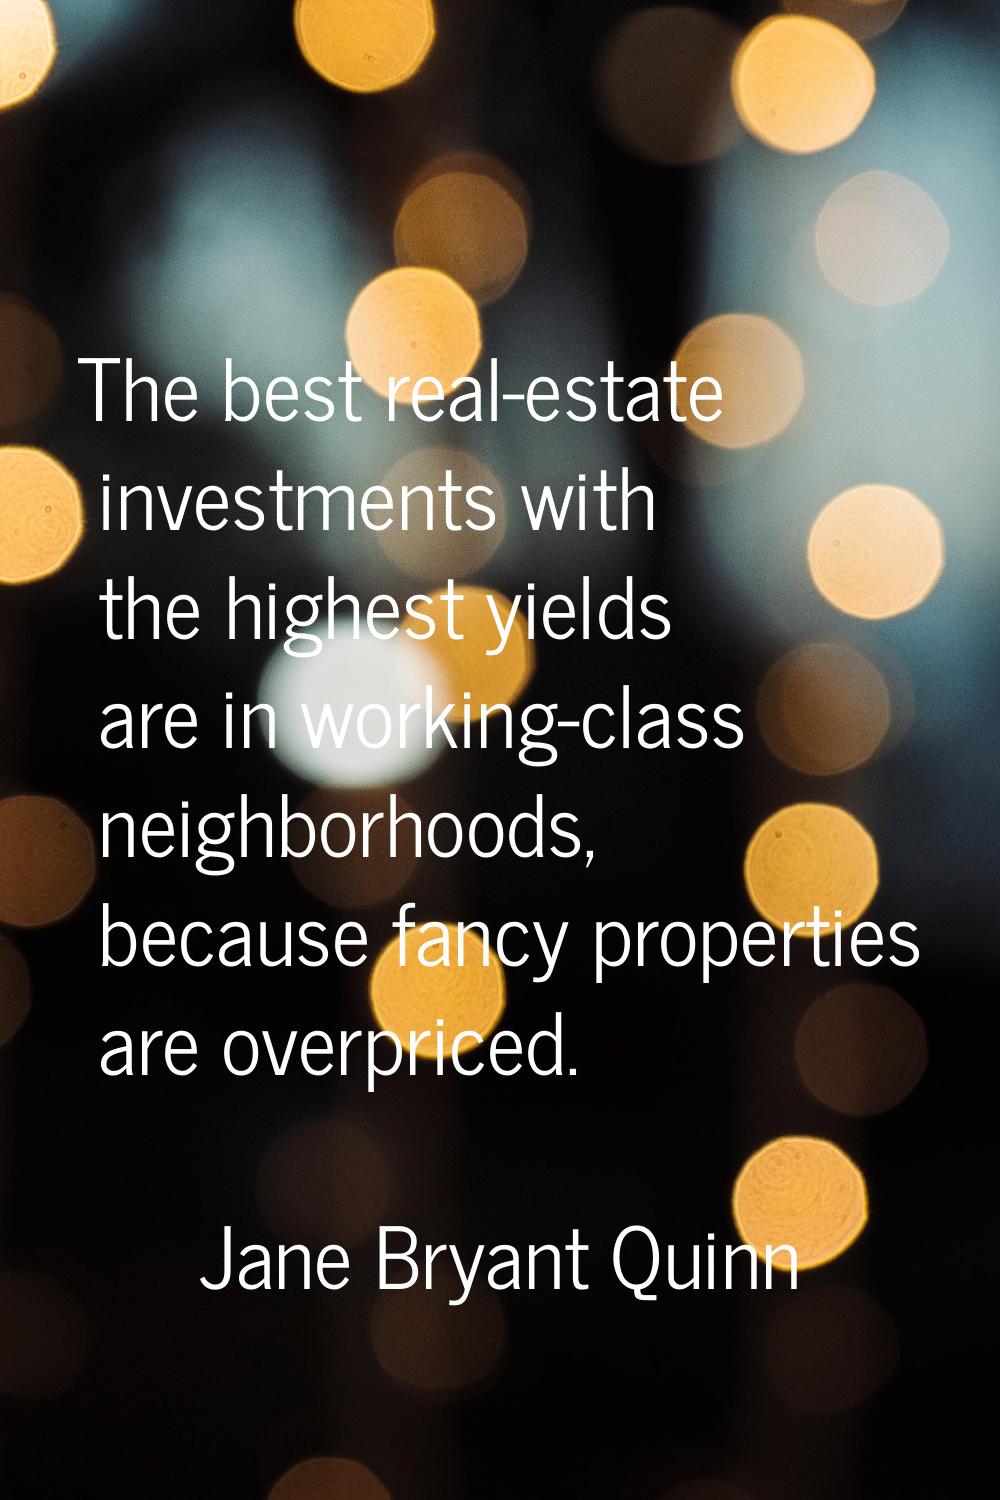 The best real-estate investments with the highest yields are in working-class neighborhoods, becaus